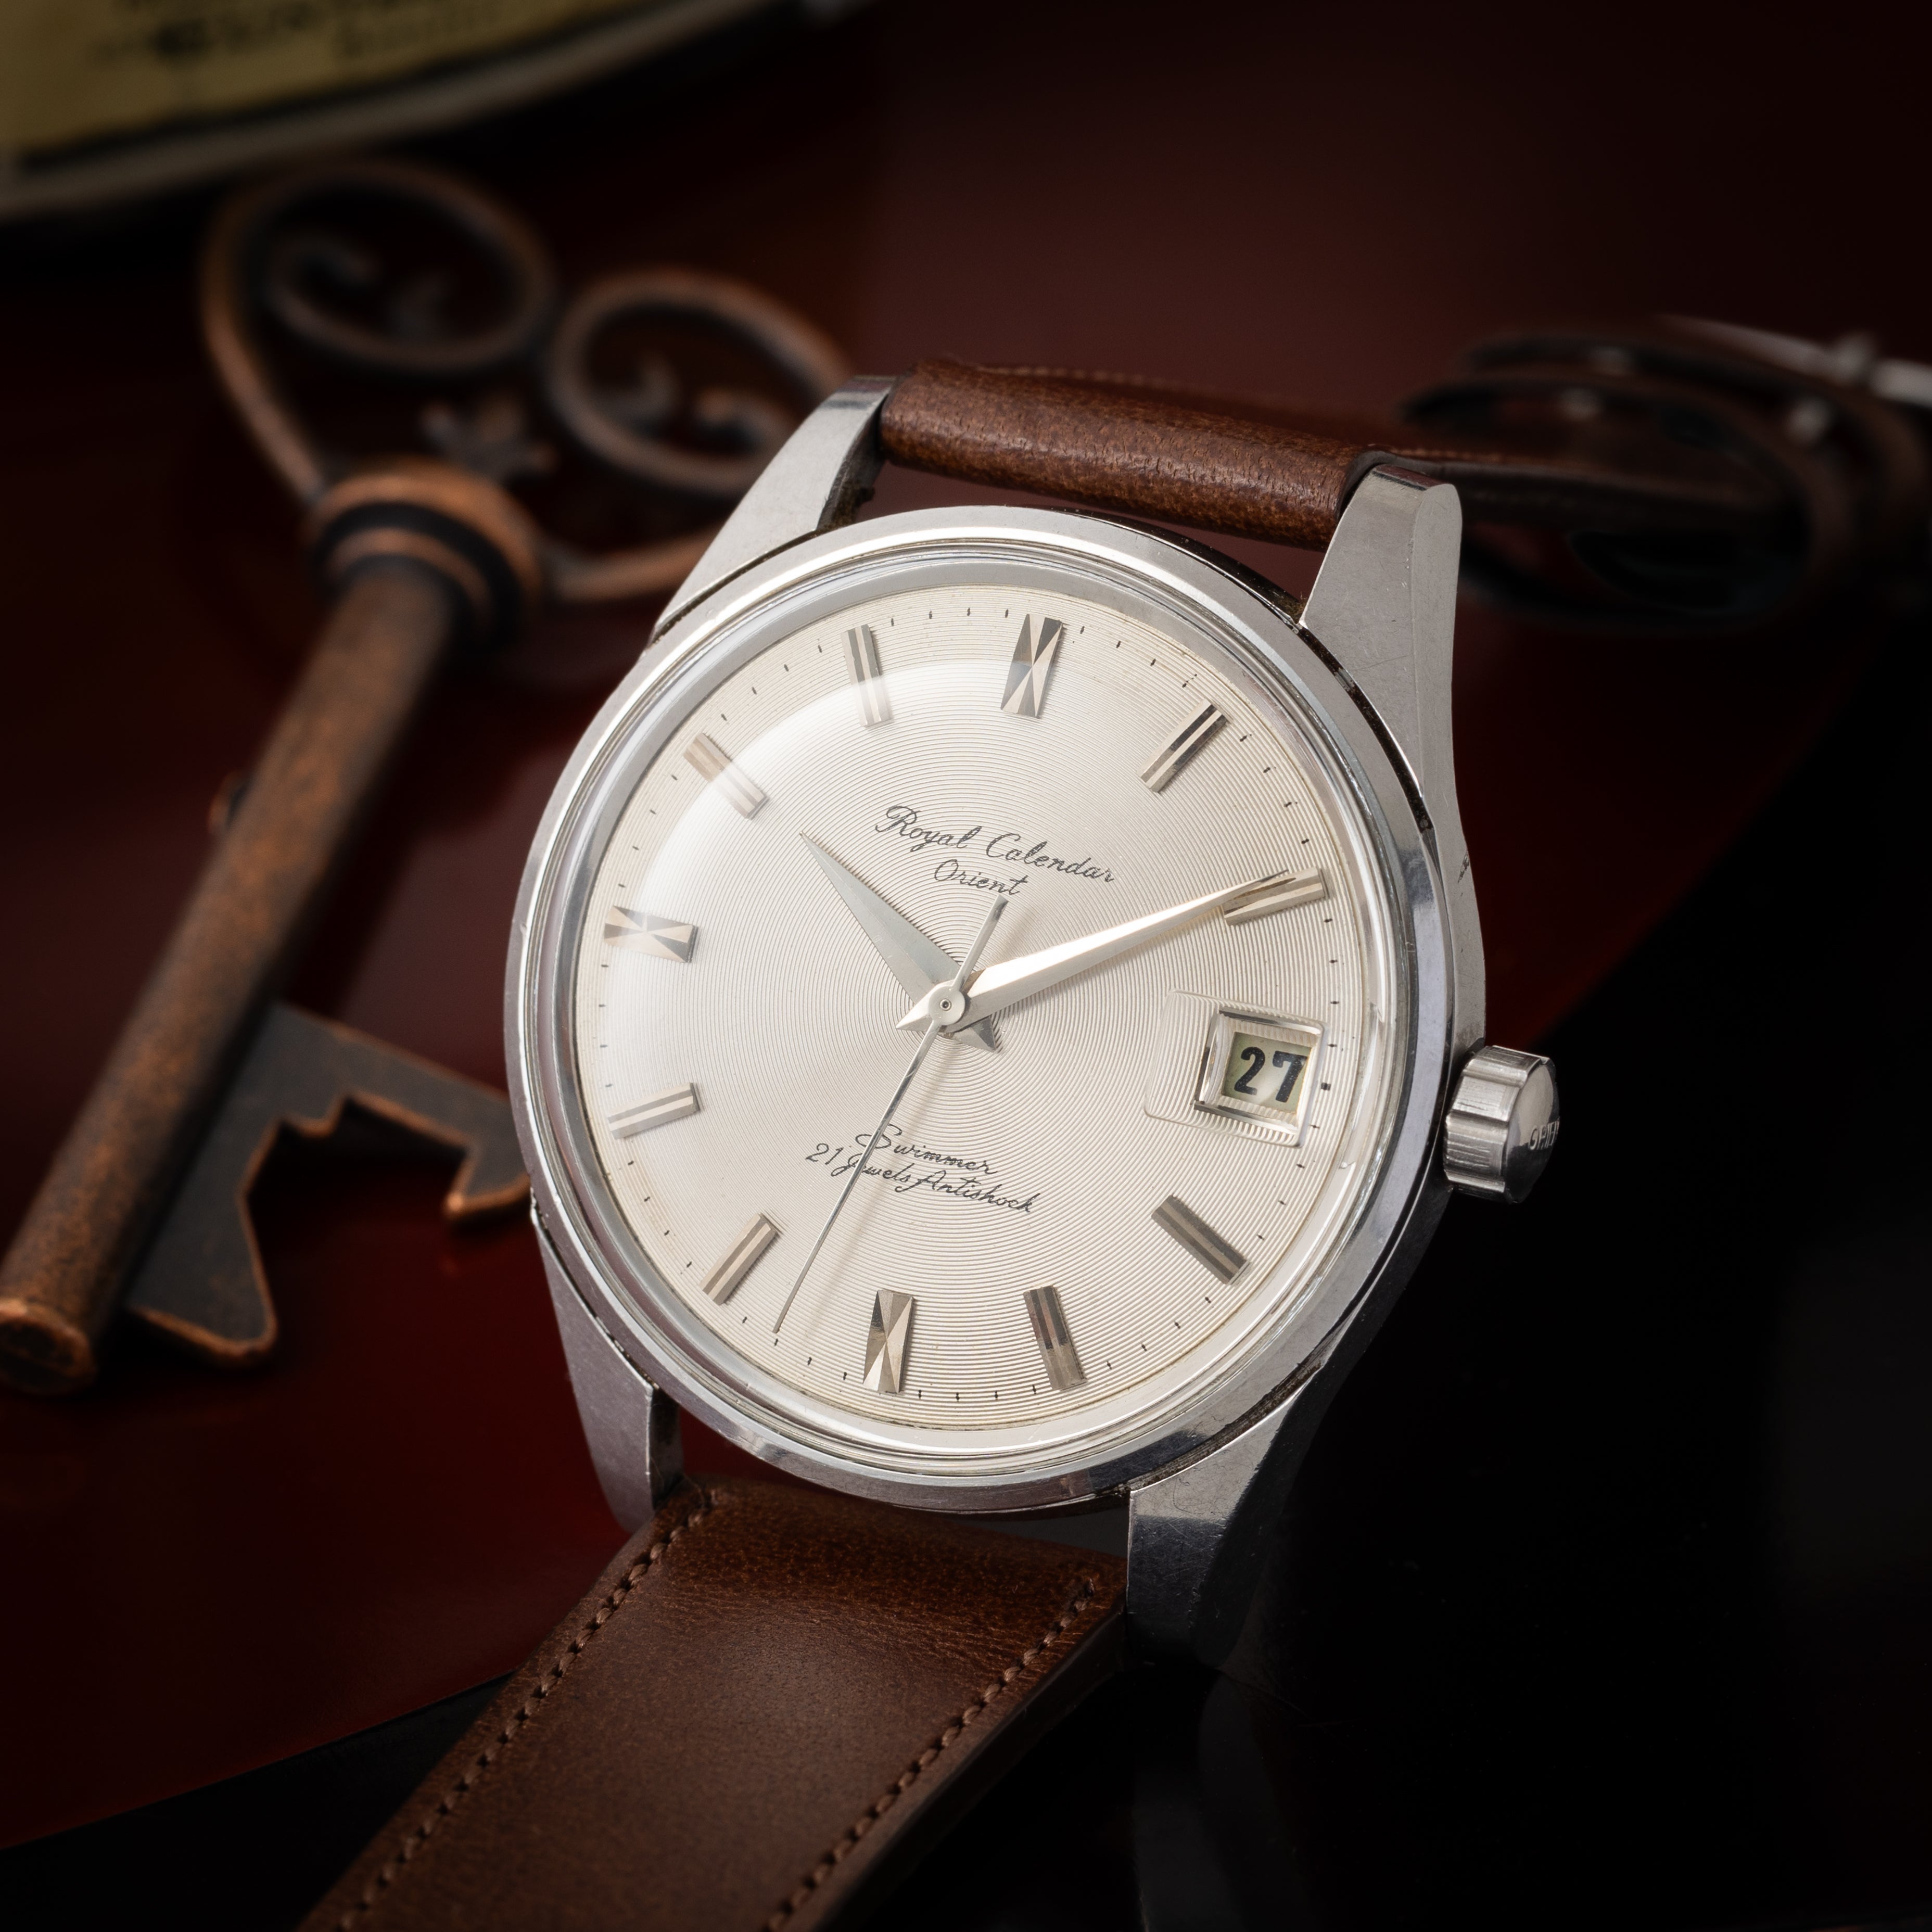 Royal Calendar Orient　60's　手巻き　ヴィンテージ腕時計vintagewatches